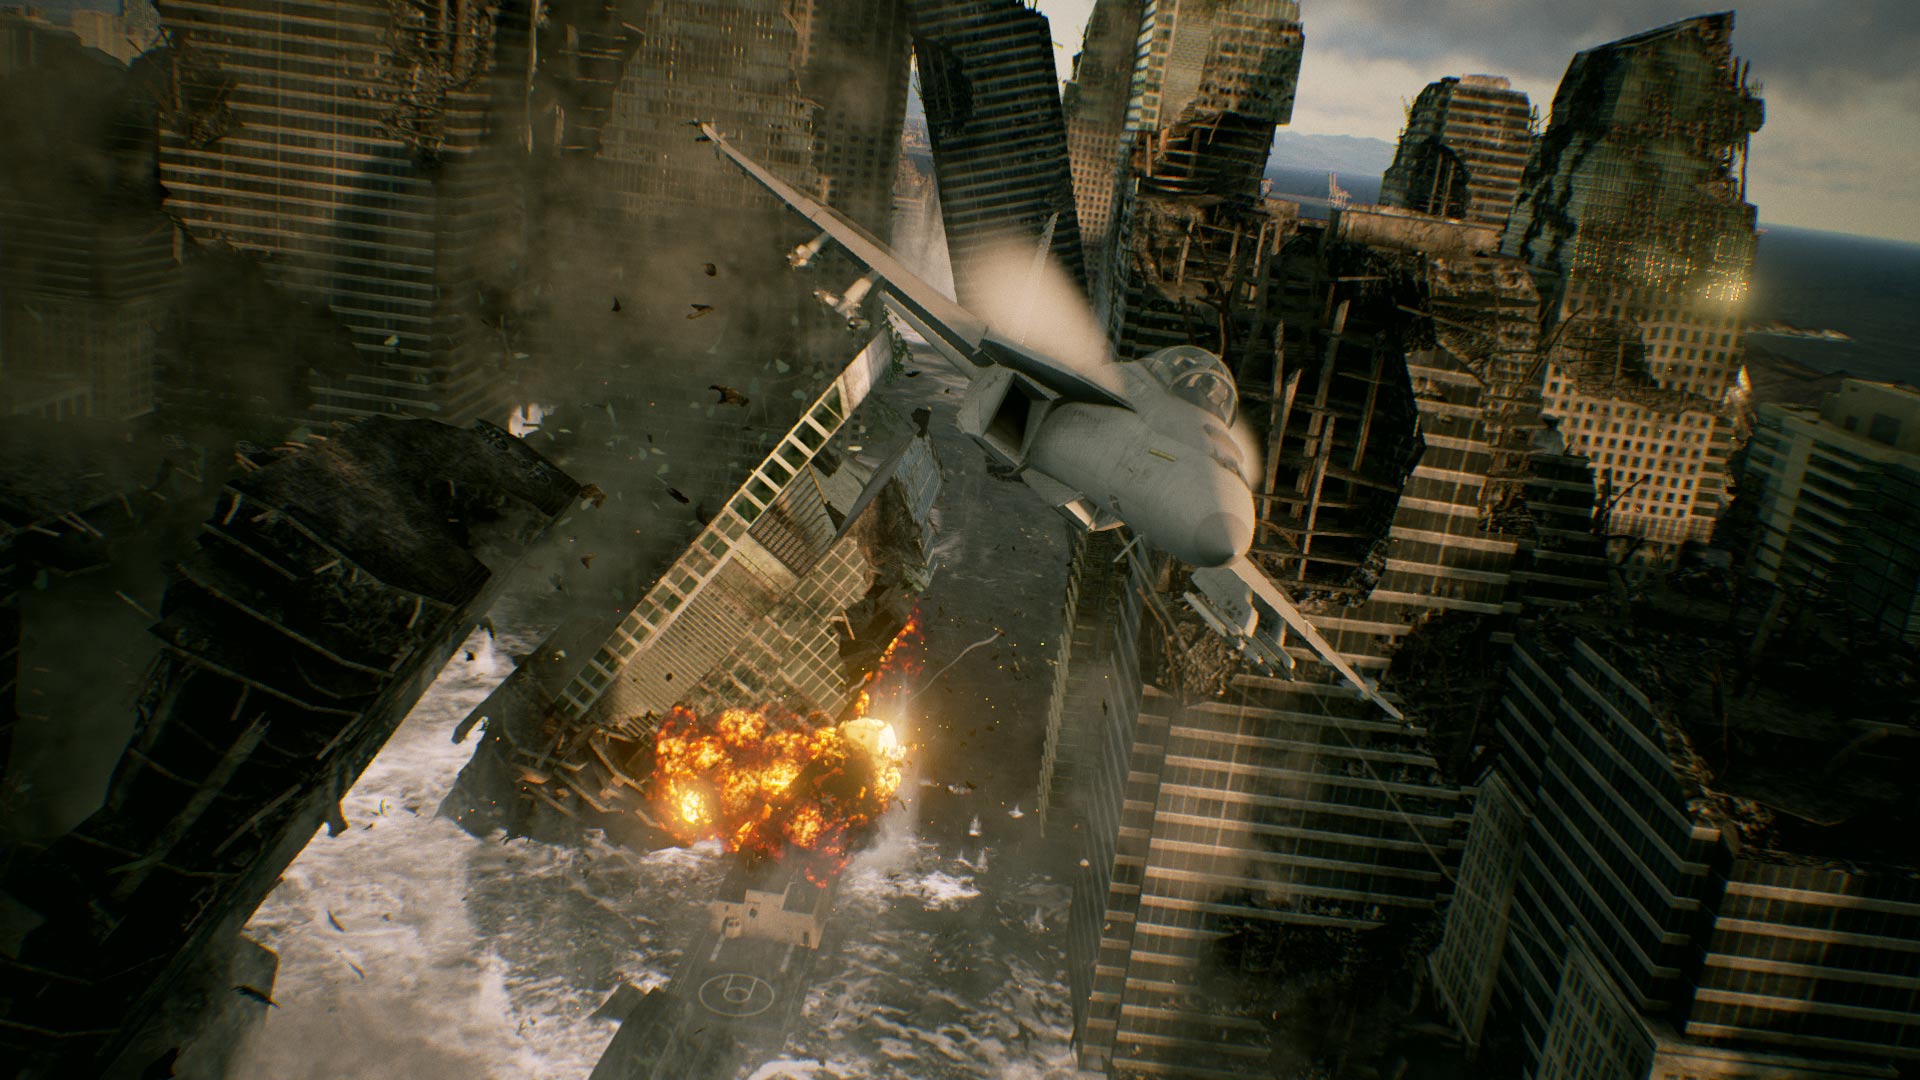 Ace Combat 7 Devs Talk About Implementing VR Into The Flight Simulator